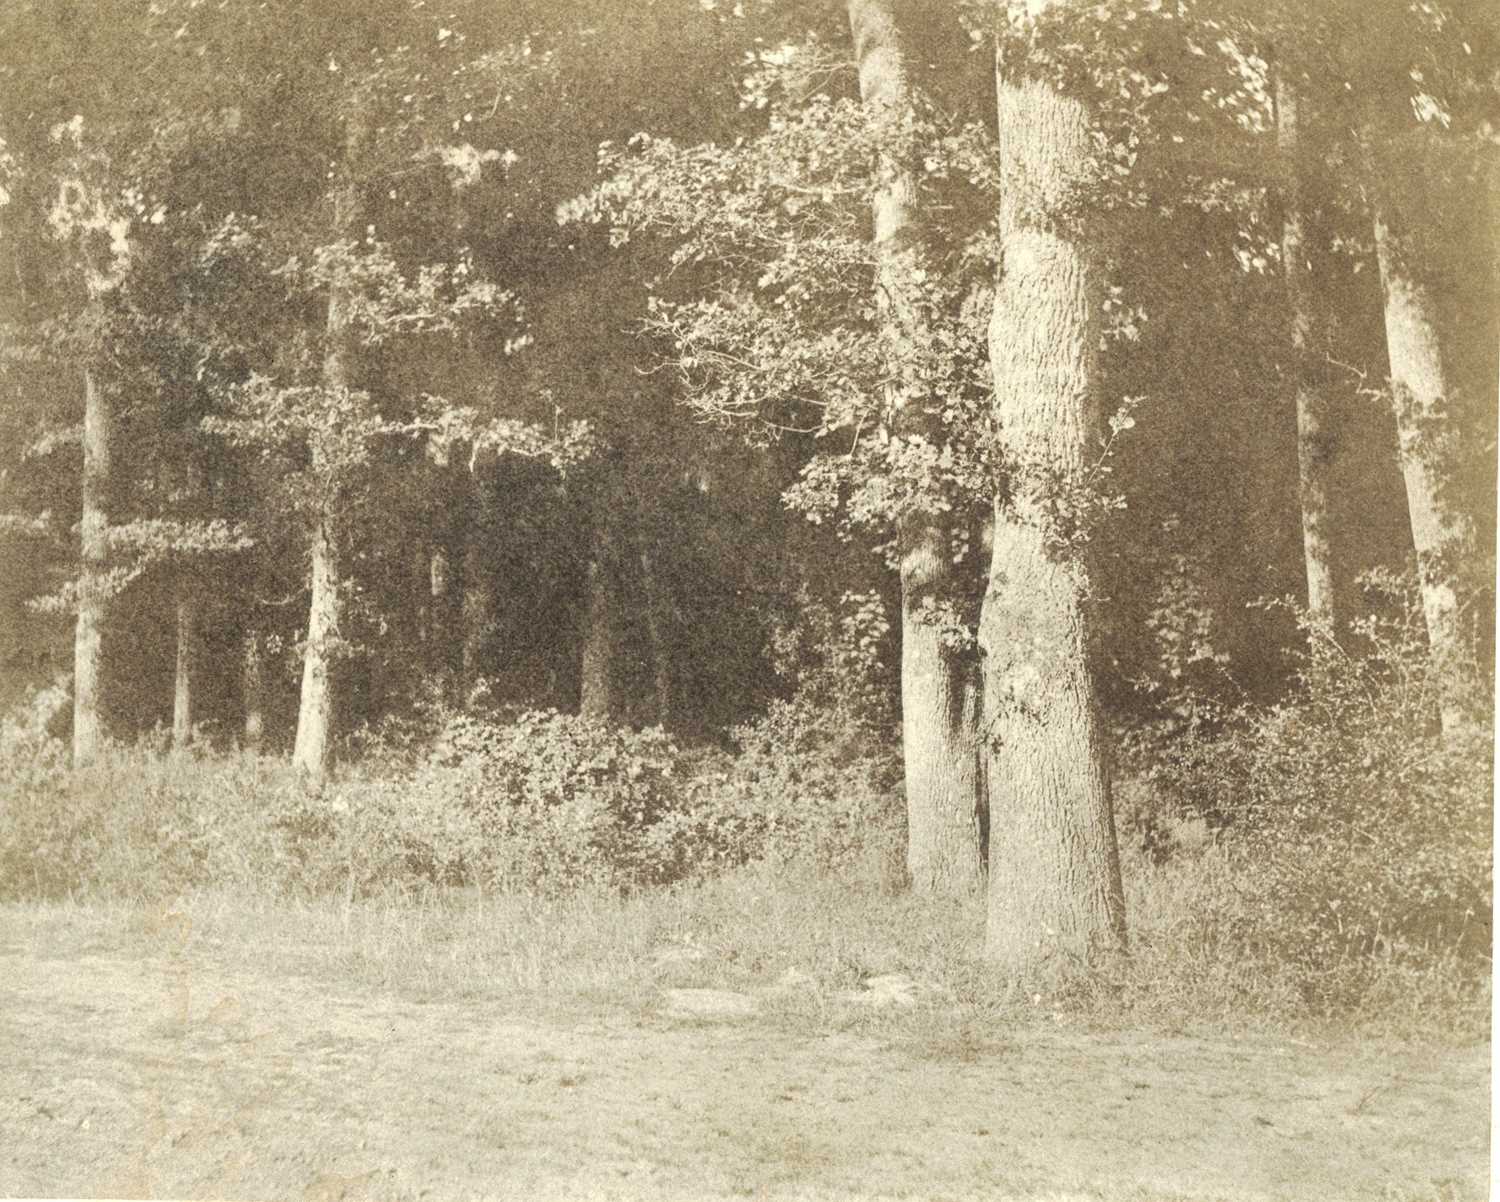 Lot 78 - CHARLES MARVILLE (1813-1879), Woodland Study